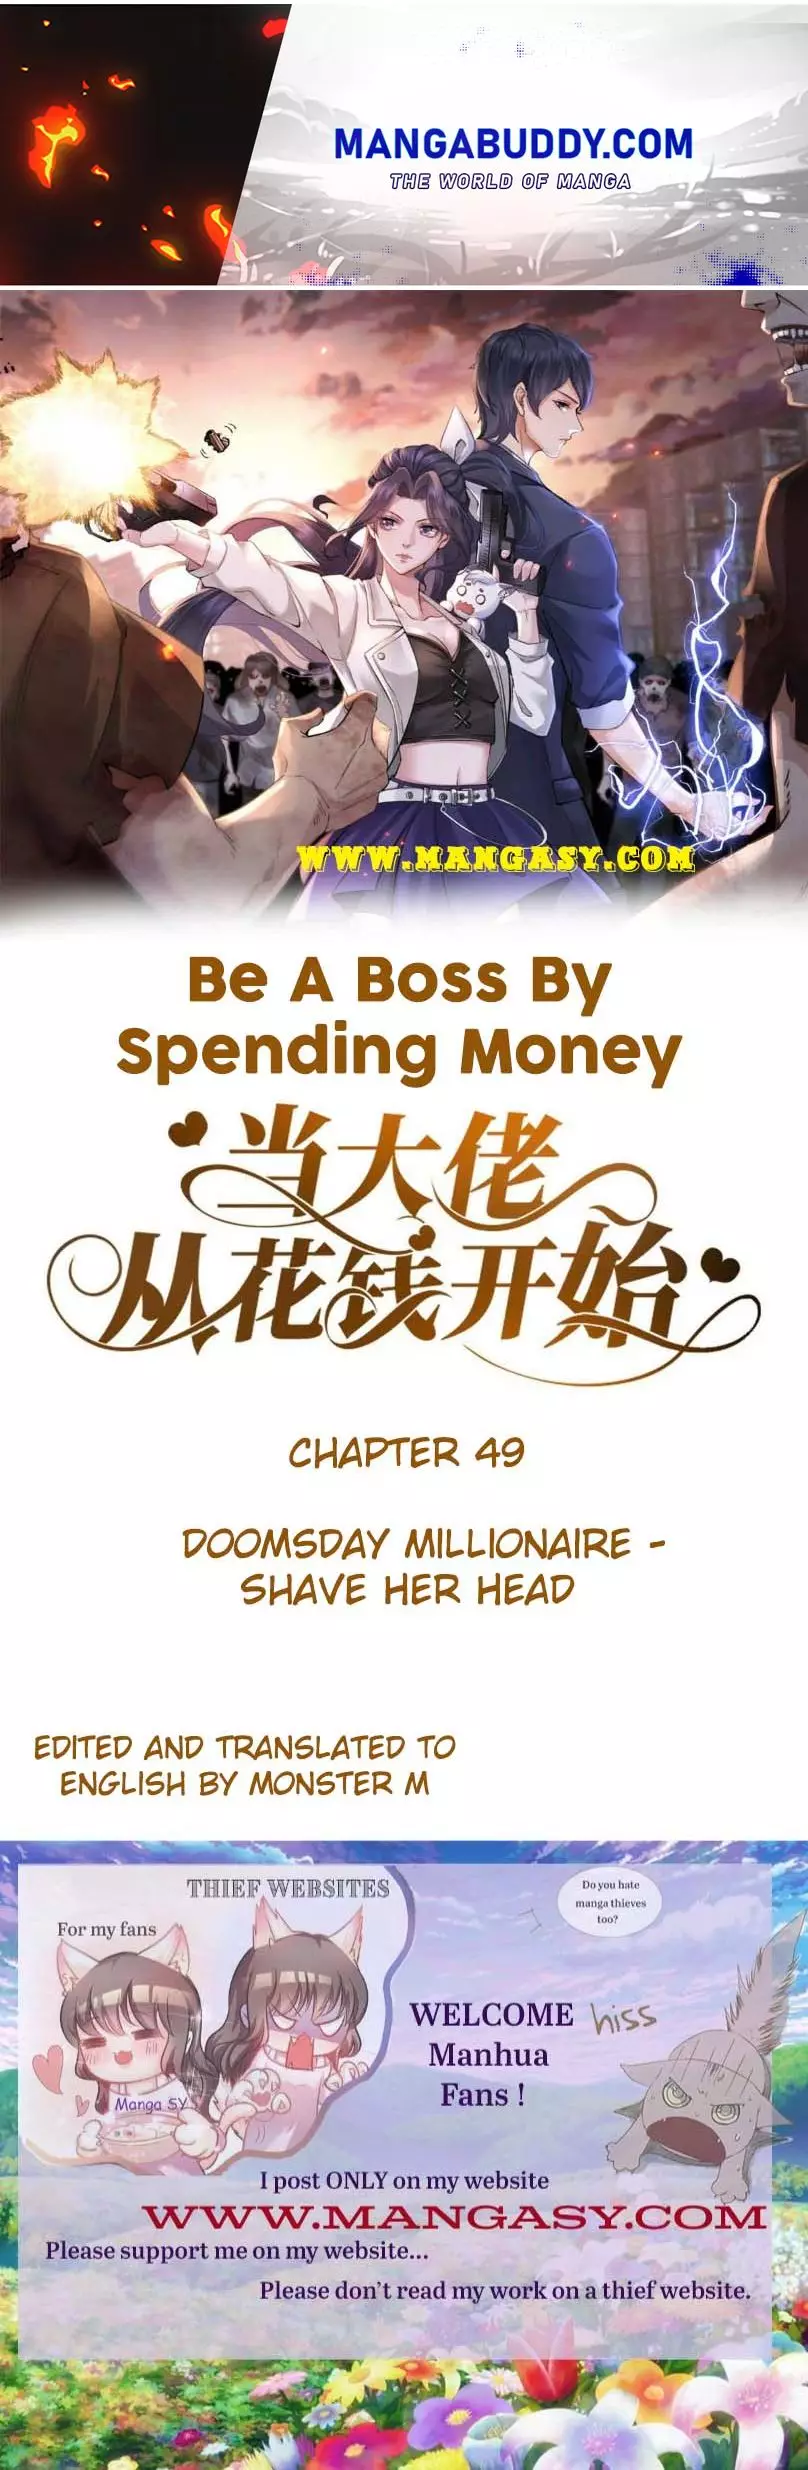 Becoming A Big Boss Starts With Spending Money - 49 page 1-7738033d